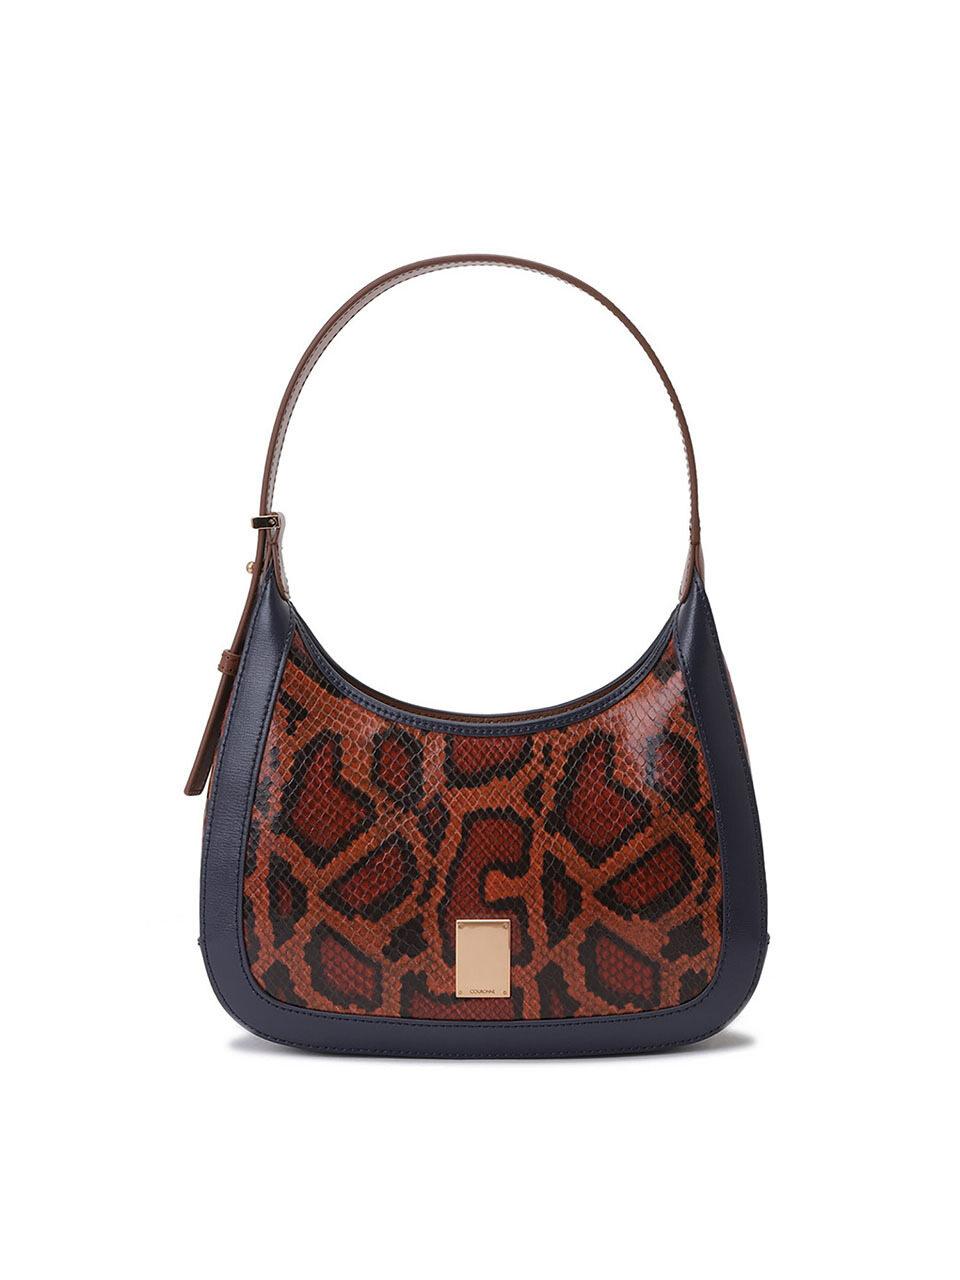 COURONNE Milla Lady Cross Bag in Brown | Lyst